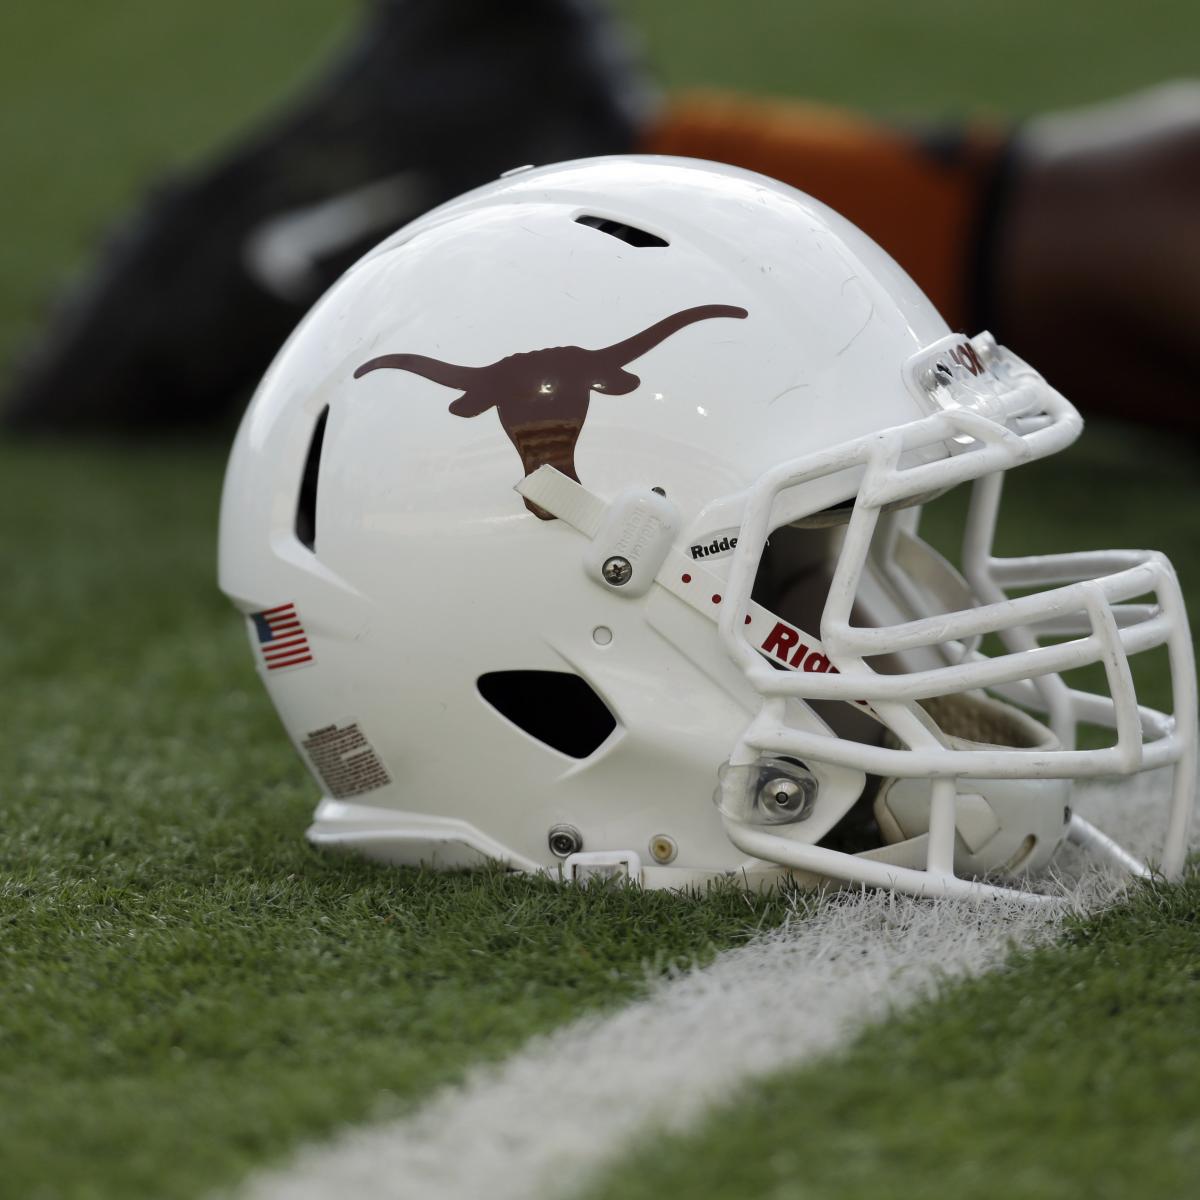 Texas Launches ‘LEVERAGE’ Program to Help Athletes Build Personal Brands | Bleacher Report